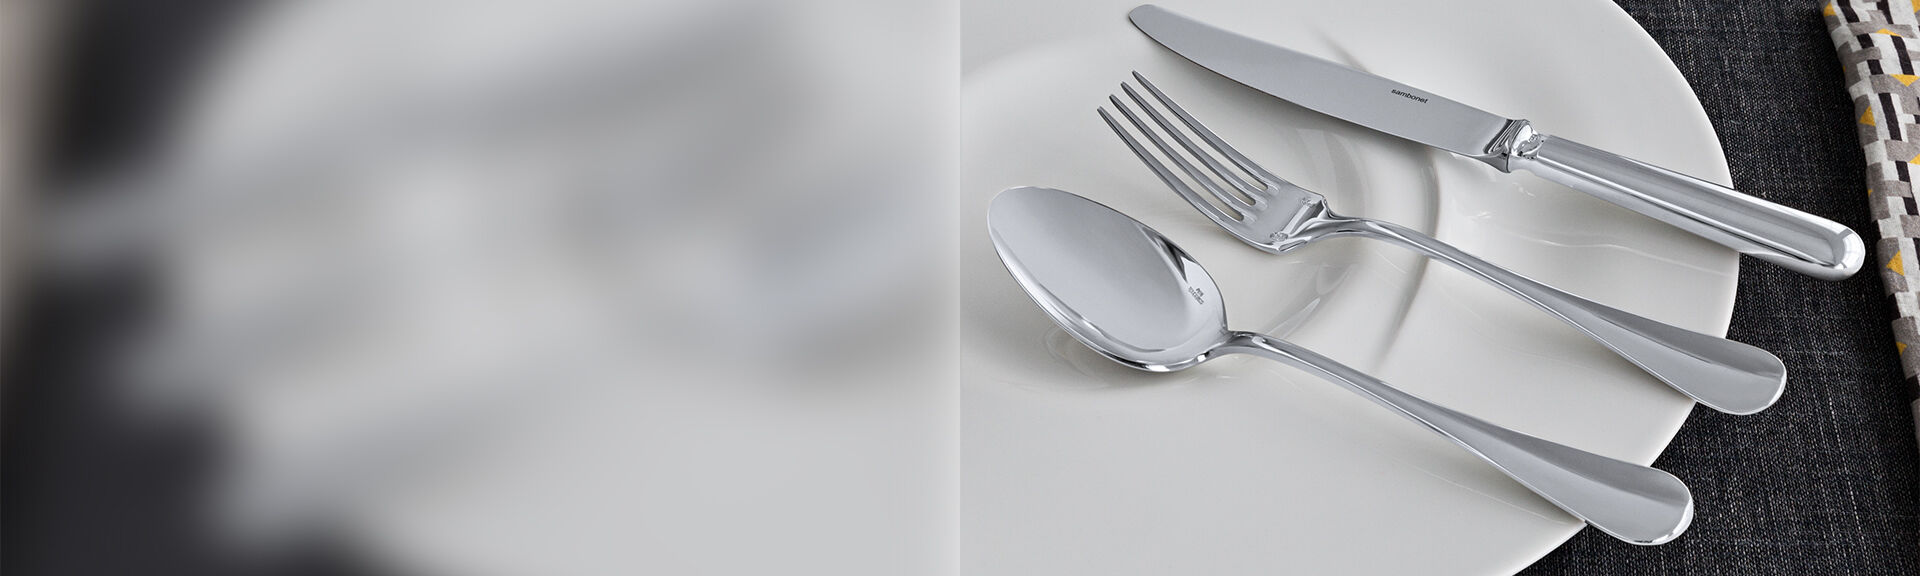 Silver plated flatware